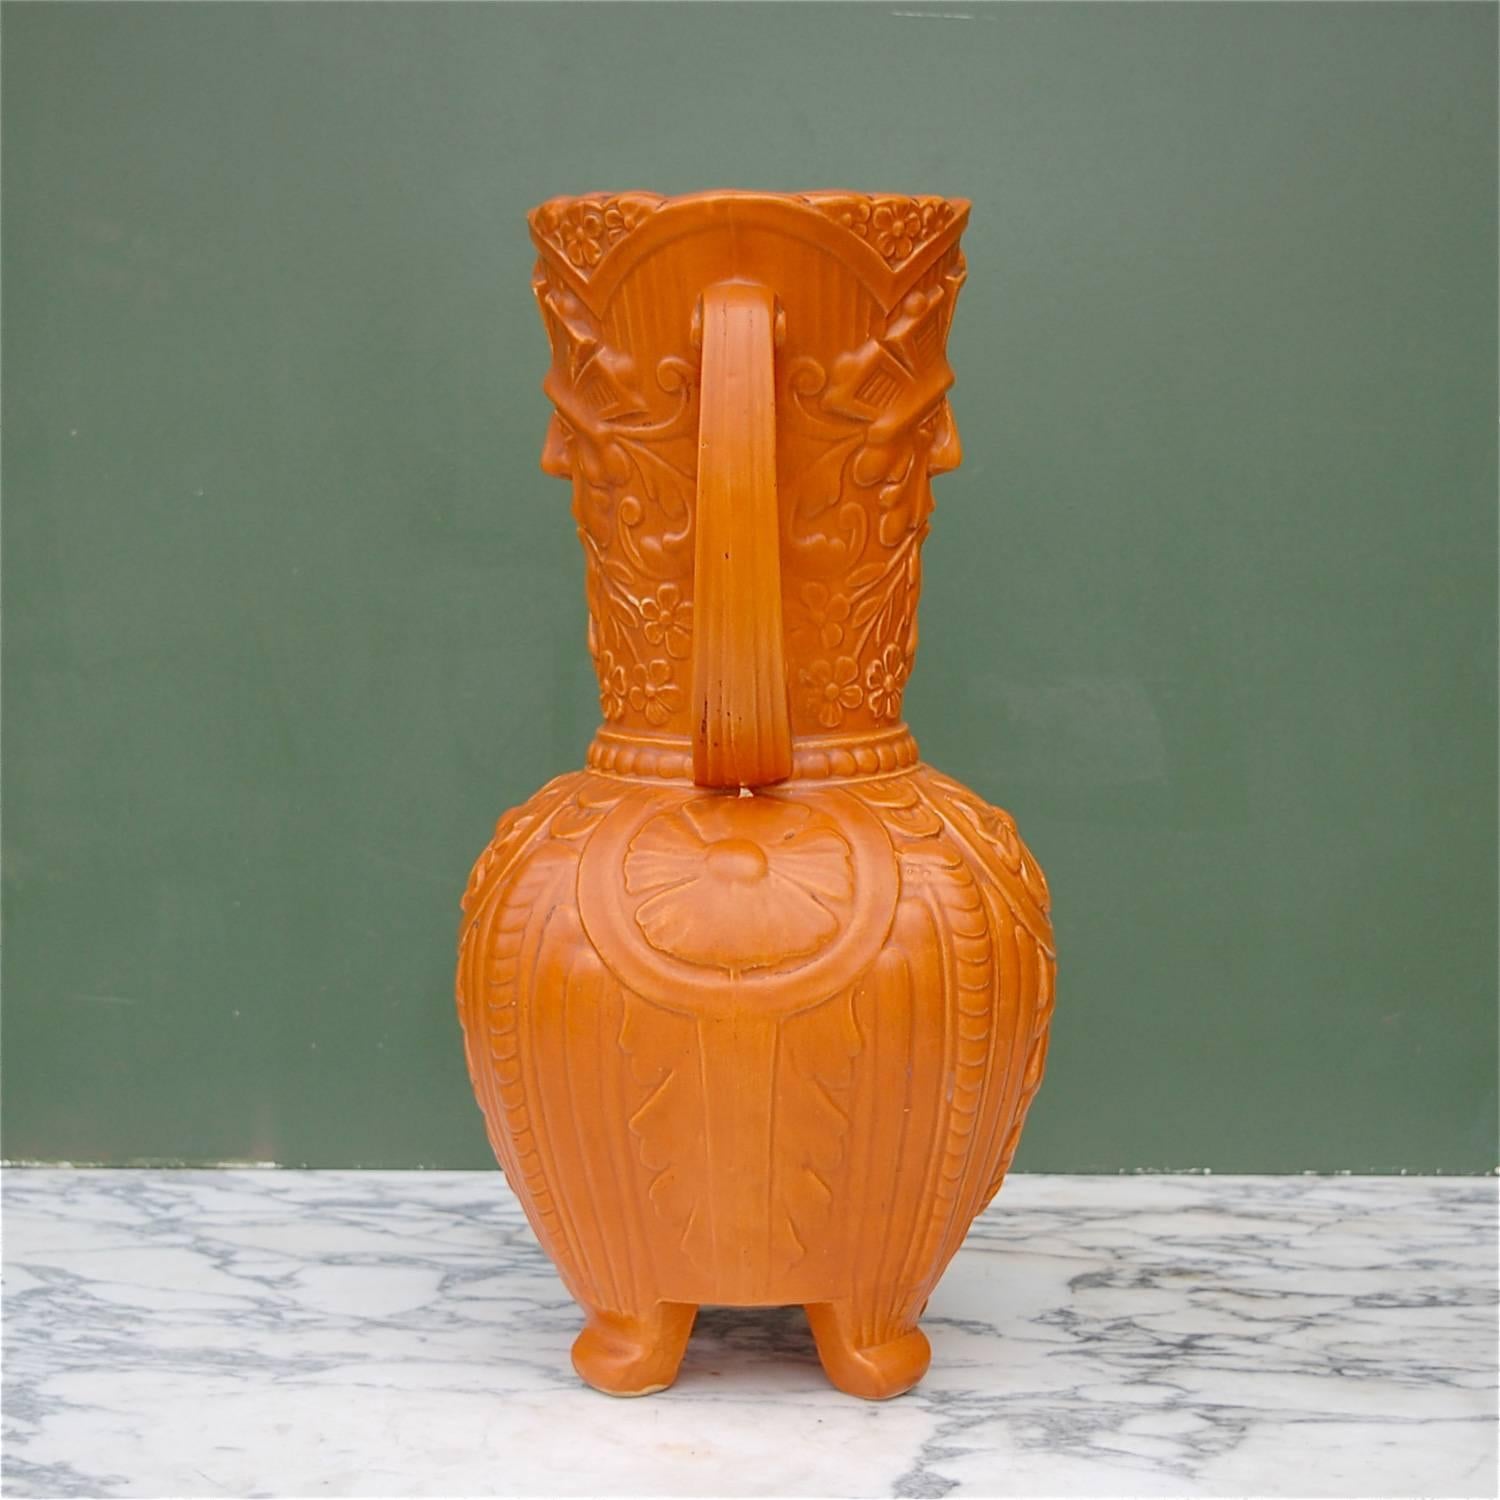 Ceramic Green Man Vase with Double Handle, Mid-20th Century For Sale 1